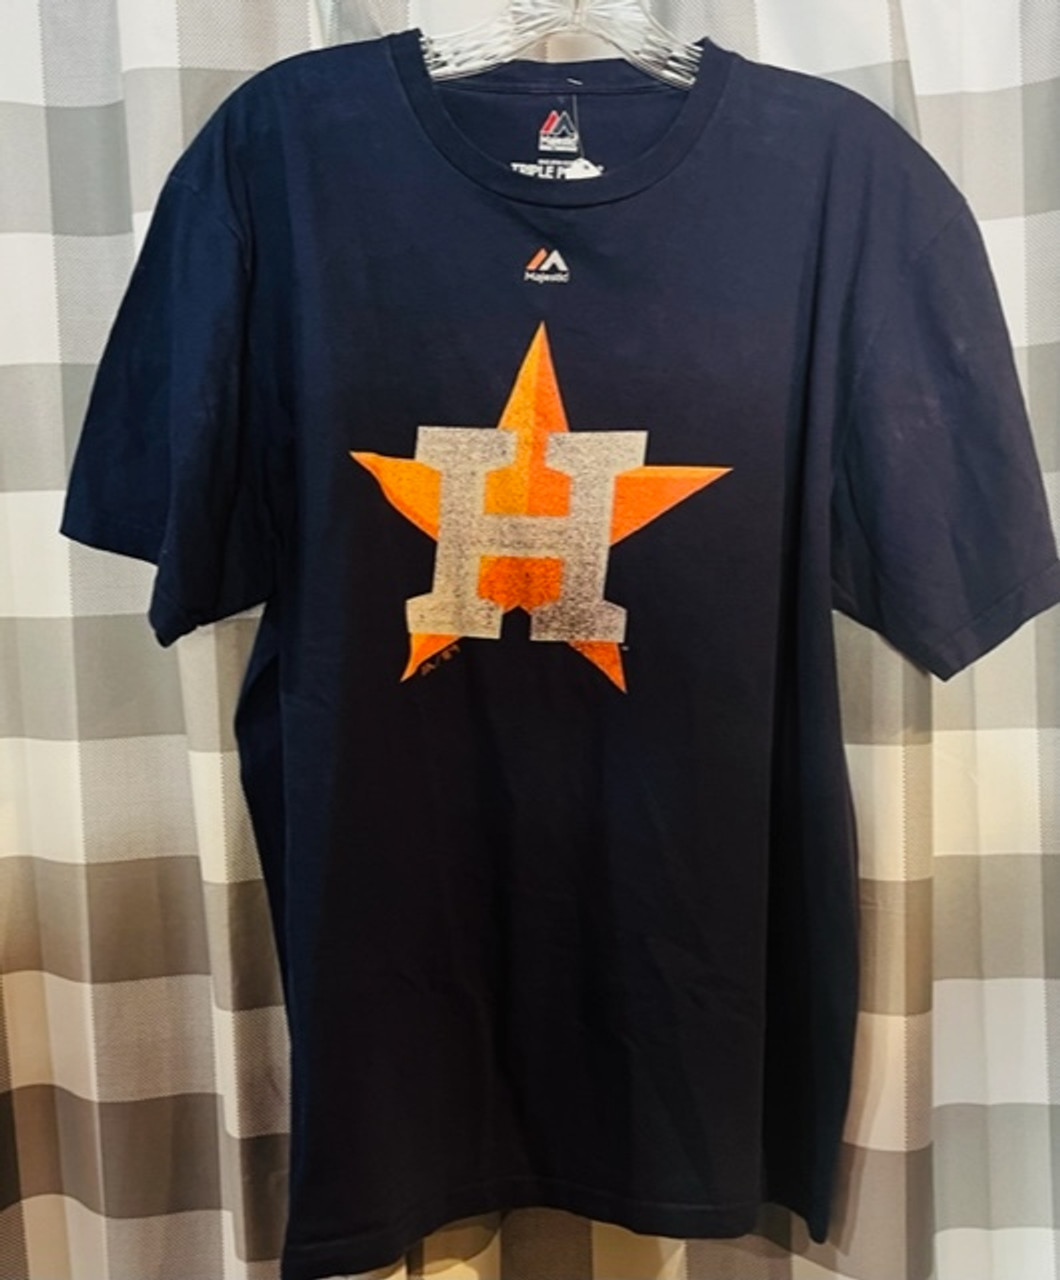 Looking for the Nike Biggio Gold Star jersey : r/Astros